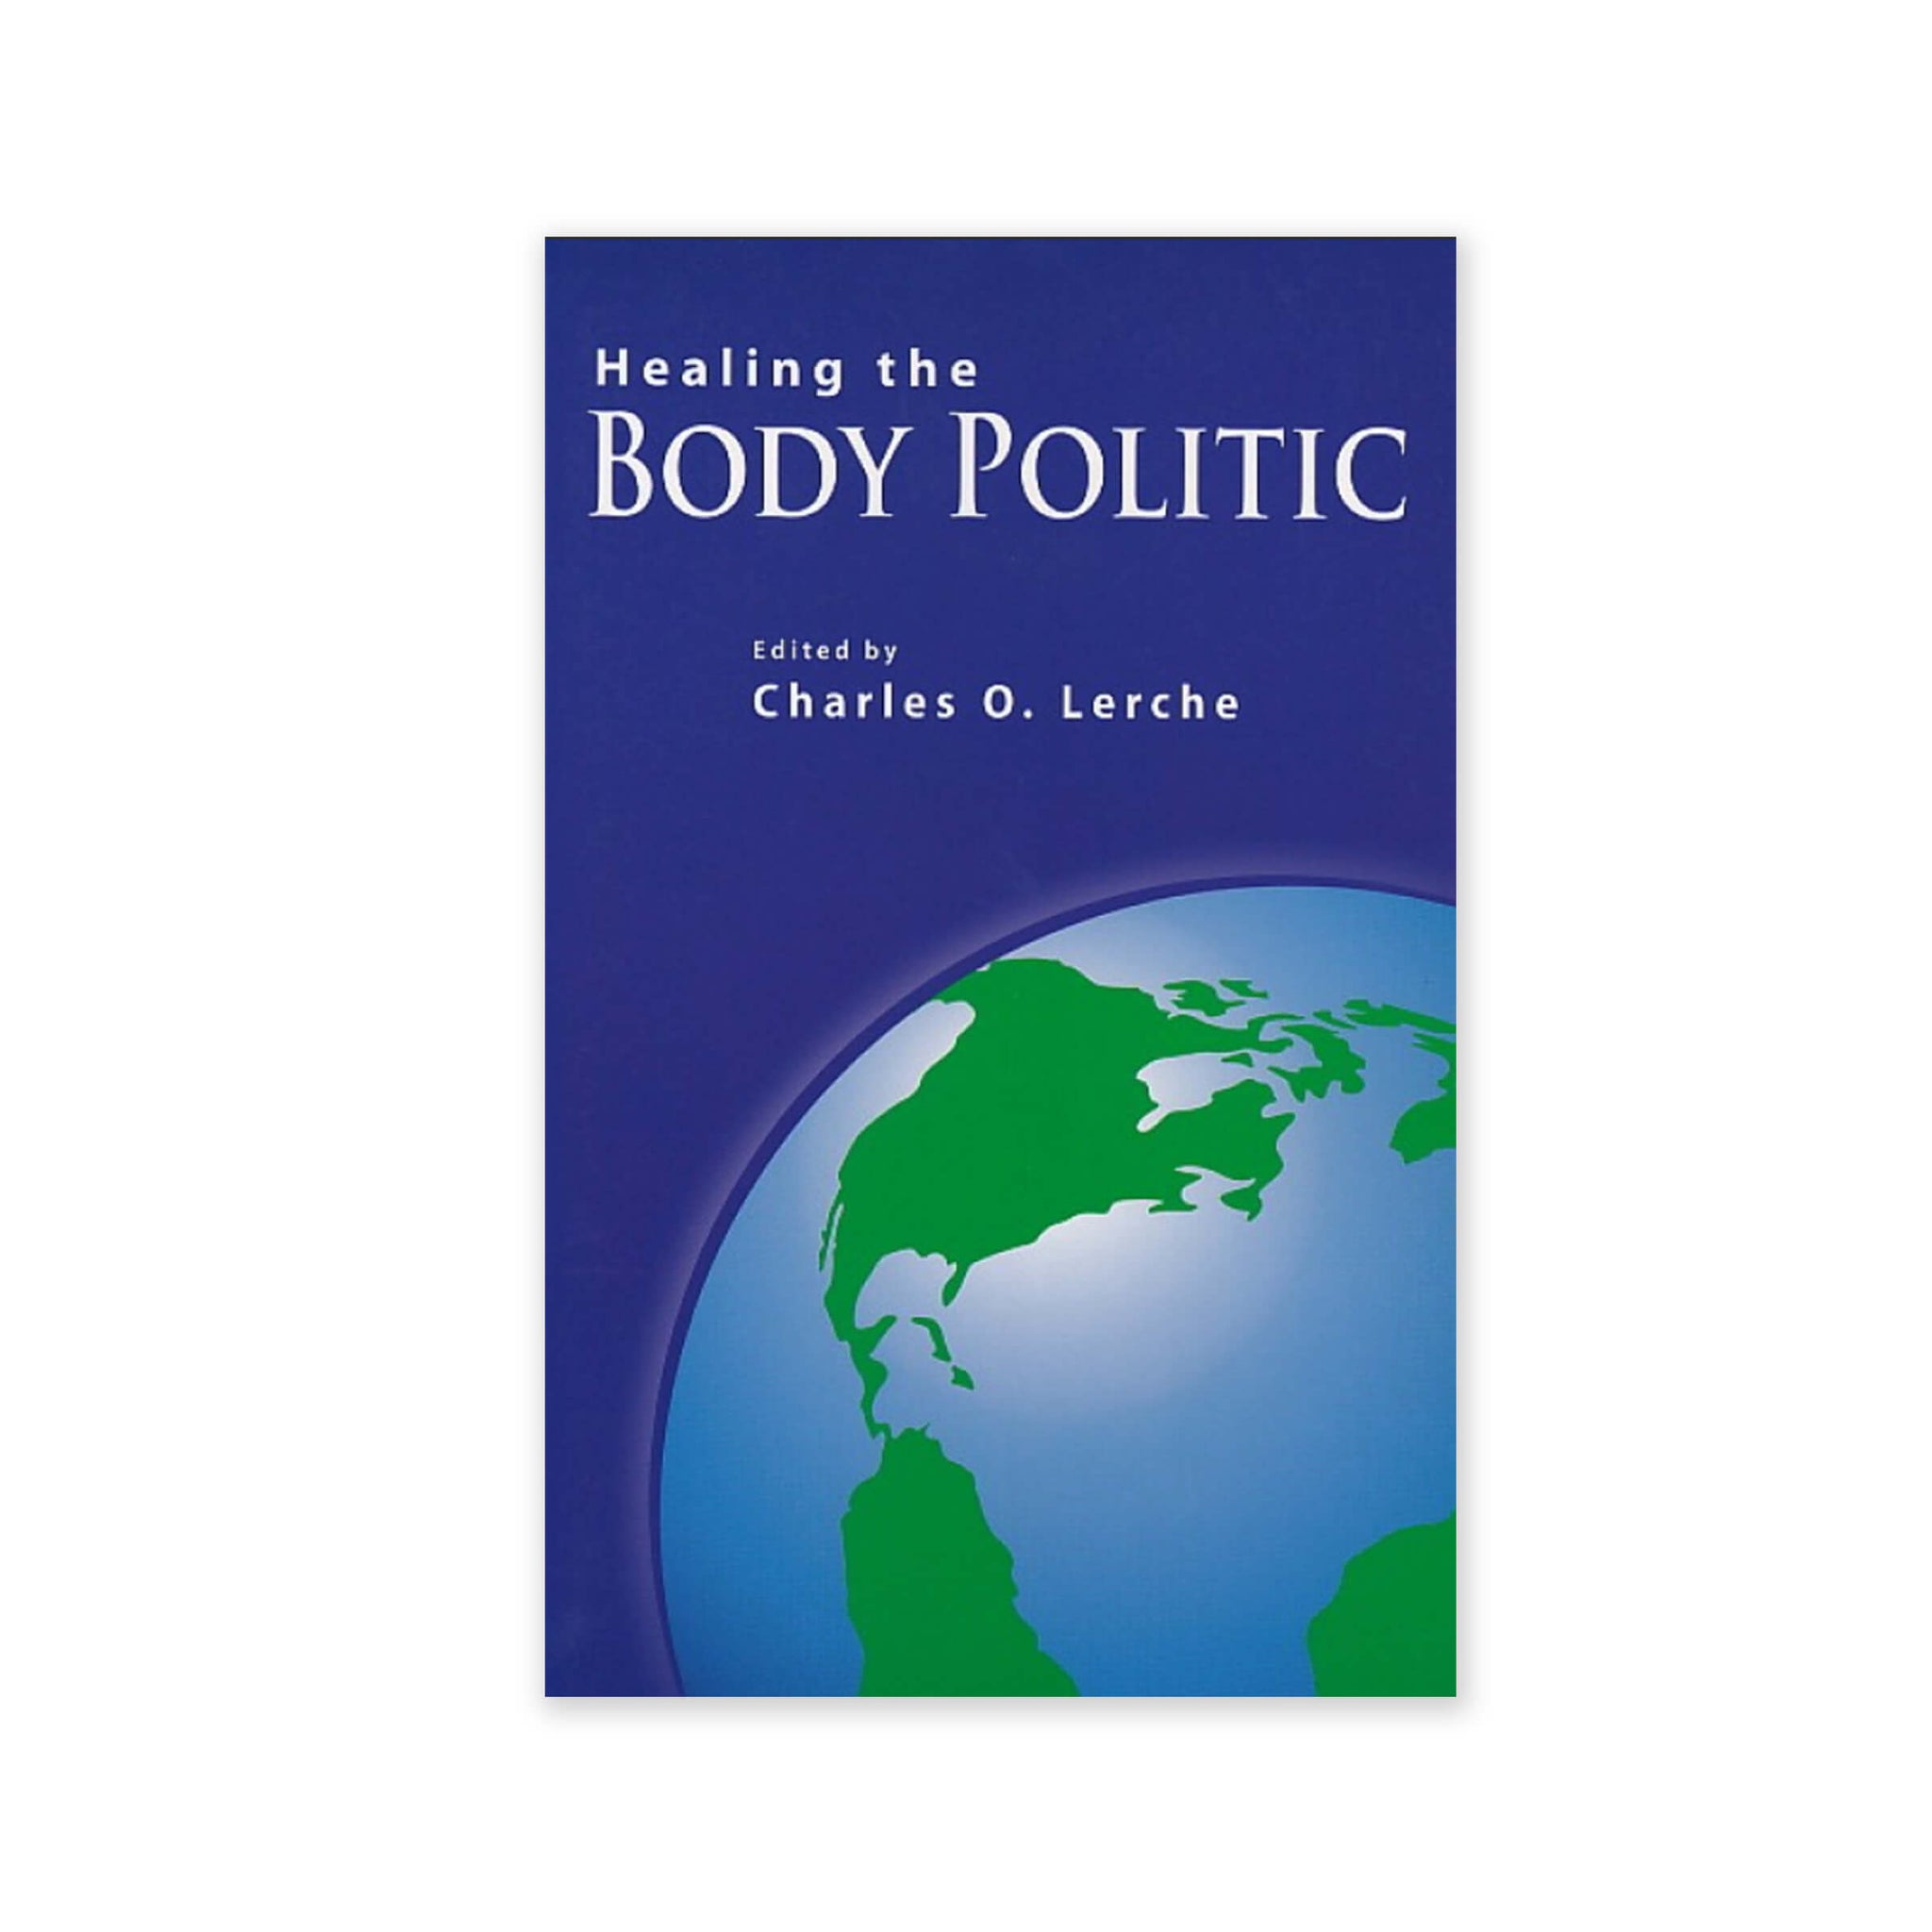 Healing the Body Politic - Baha'i Perspectives On Peace And Conflict Resolution